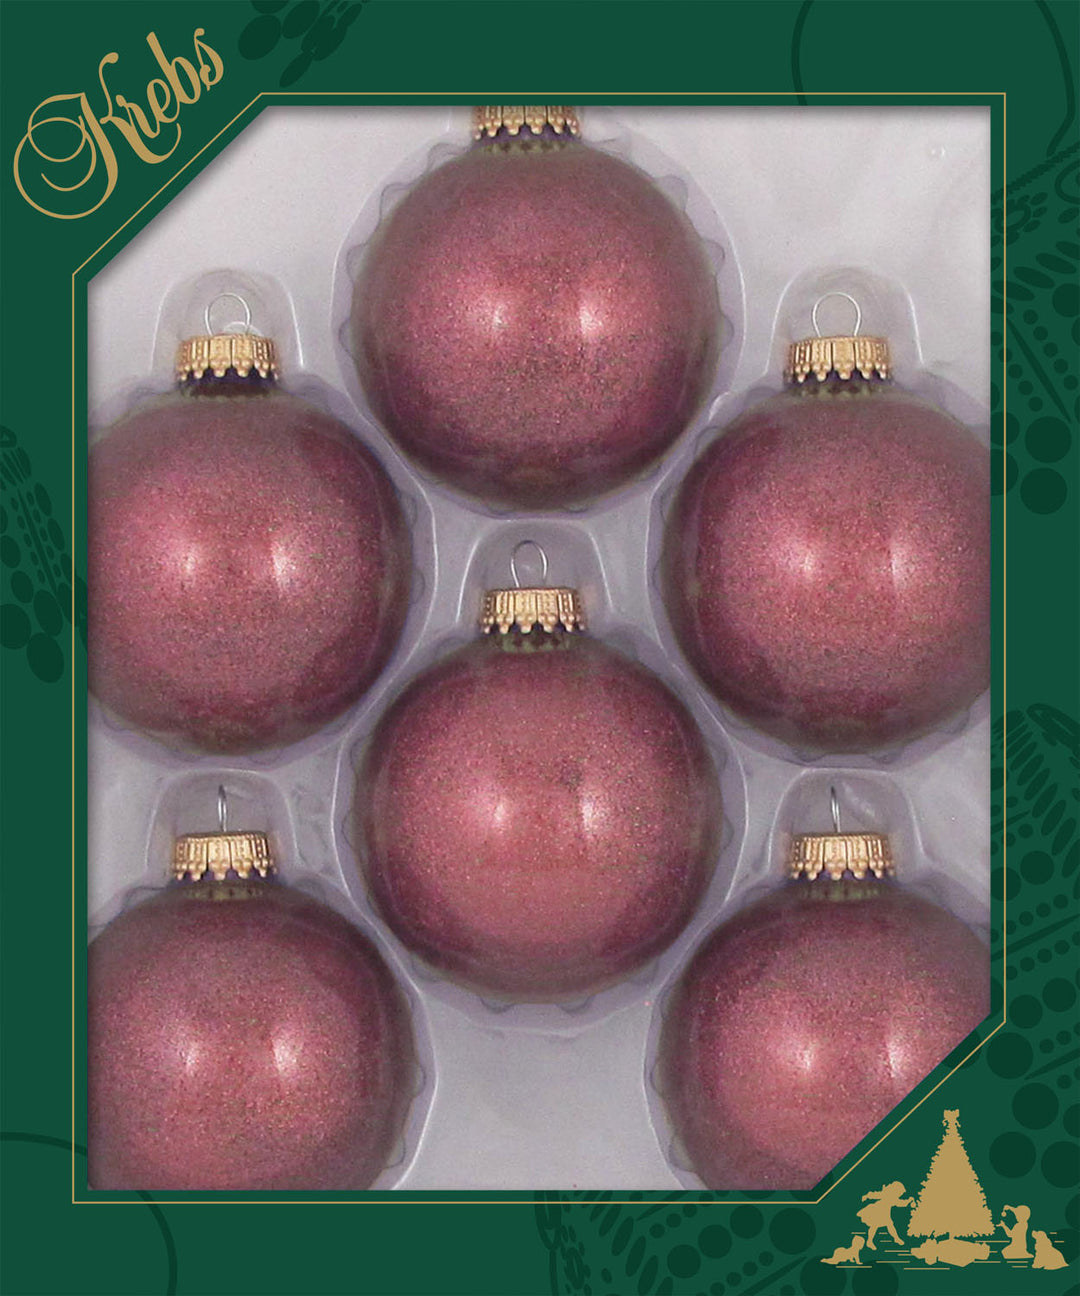 Glass Christmas Tree Ornaments - 67mm / 2.63" [6 Pieces] Designer Balls from Christmas By Krebs Seamless Hanging Holiday Decor (Cranberry Merlot Red Sparkle)